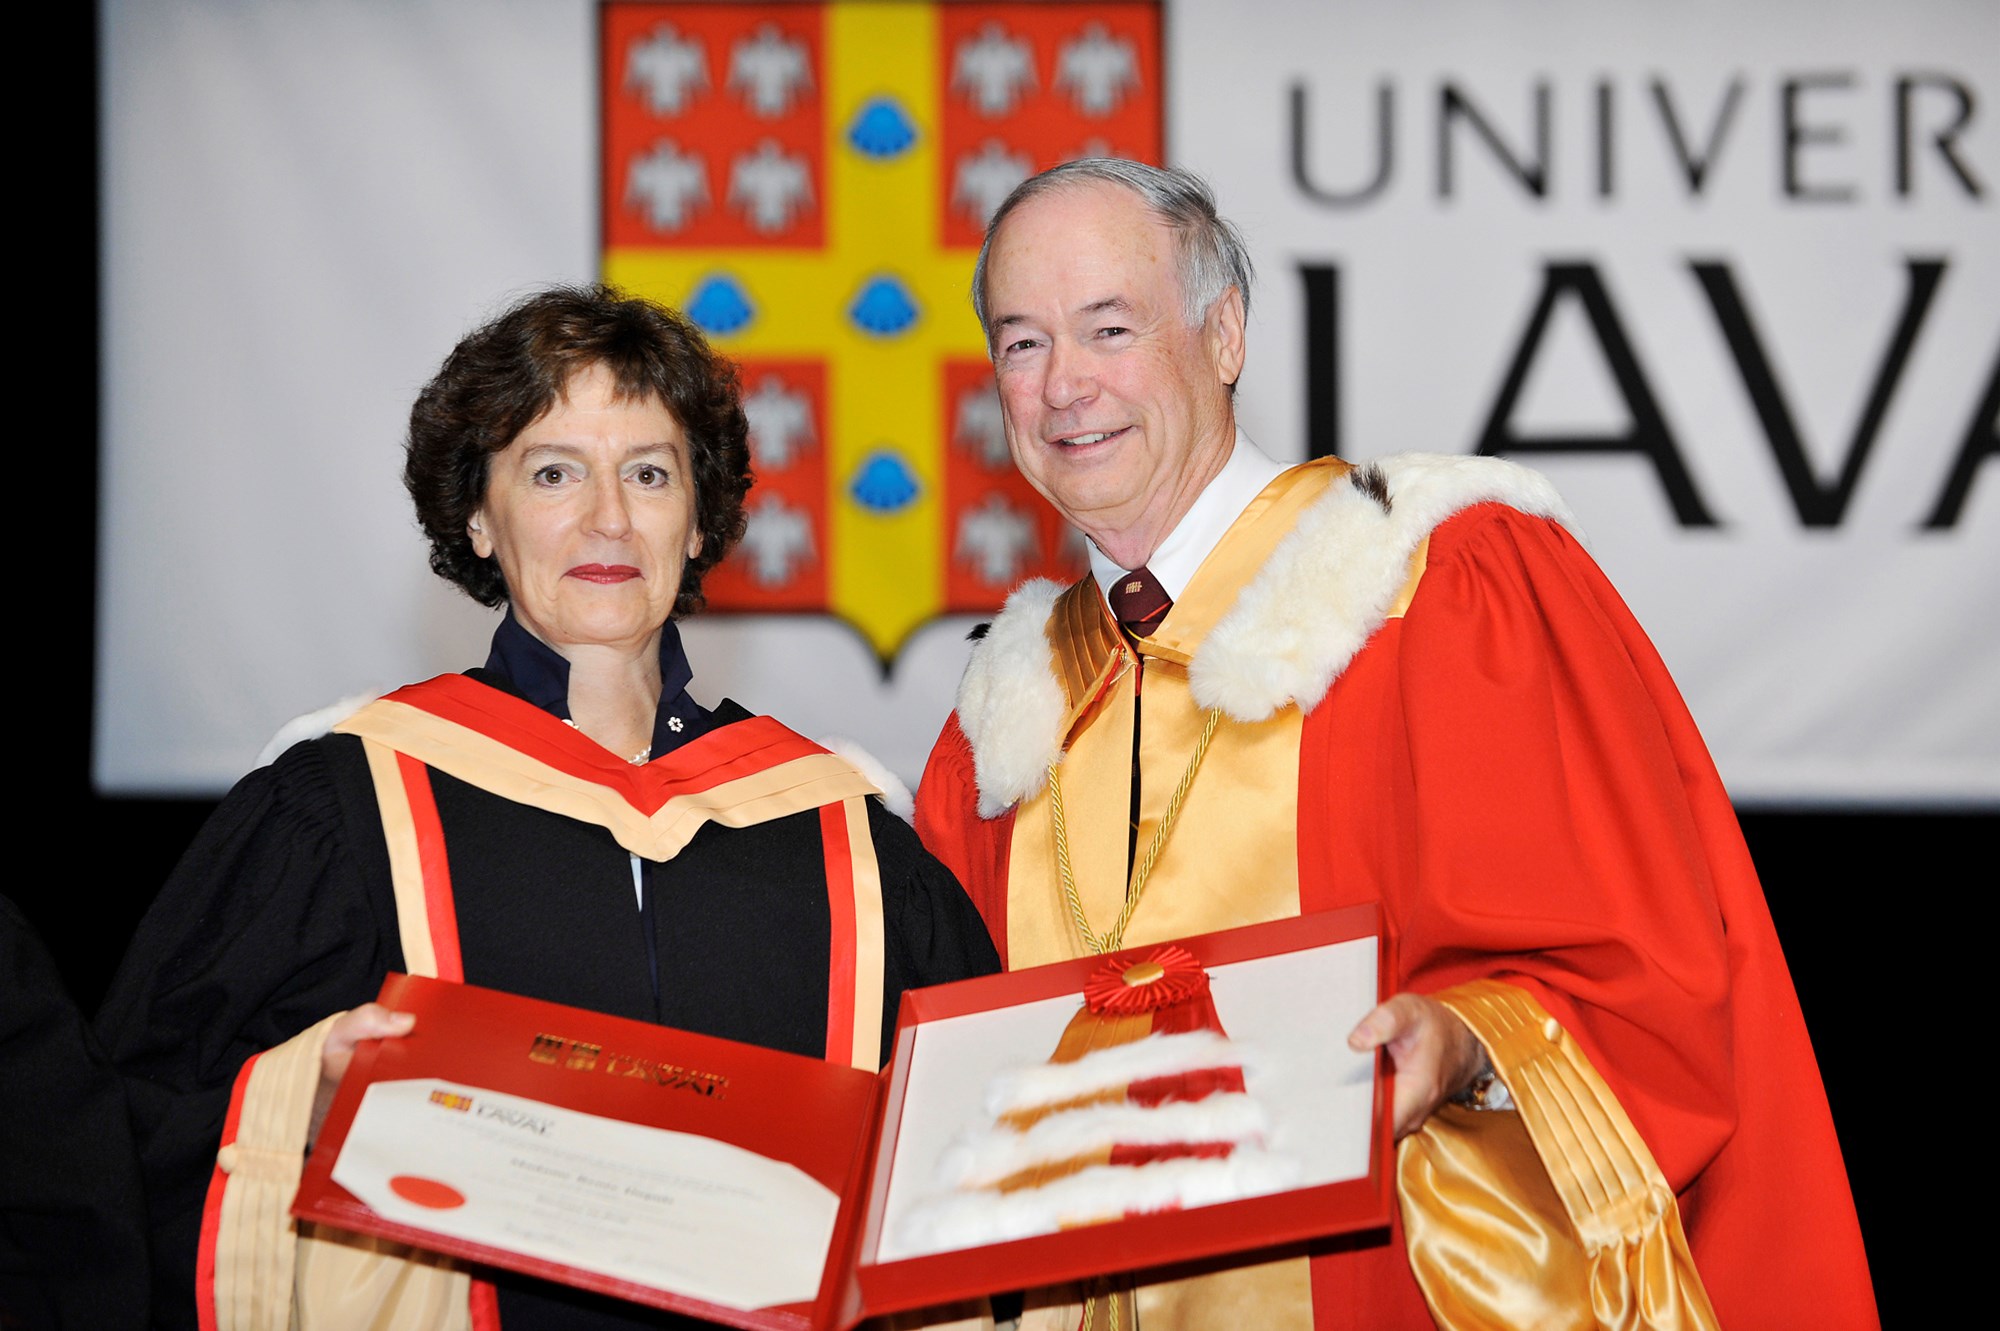 Rector Denis Brière presents Senator Dupuis with an honorary Doctor of Laws degree from the University of Laval in June 2012.